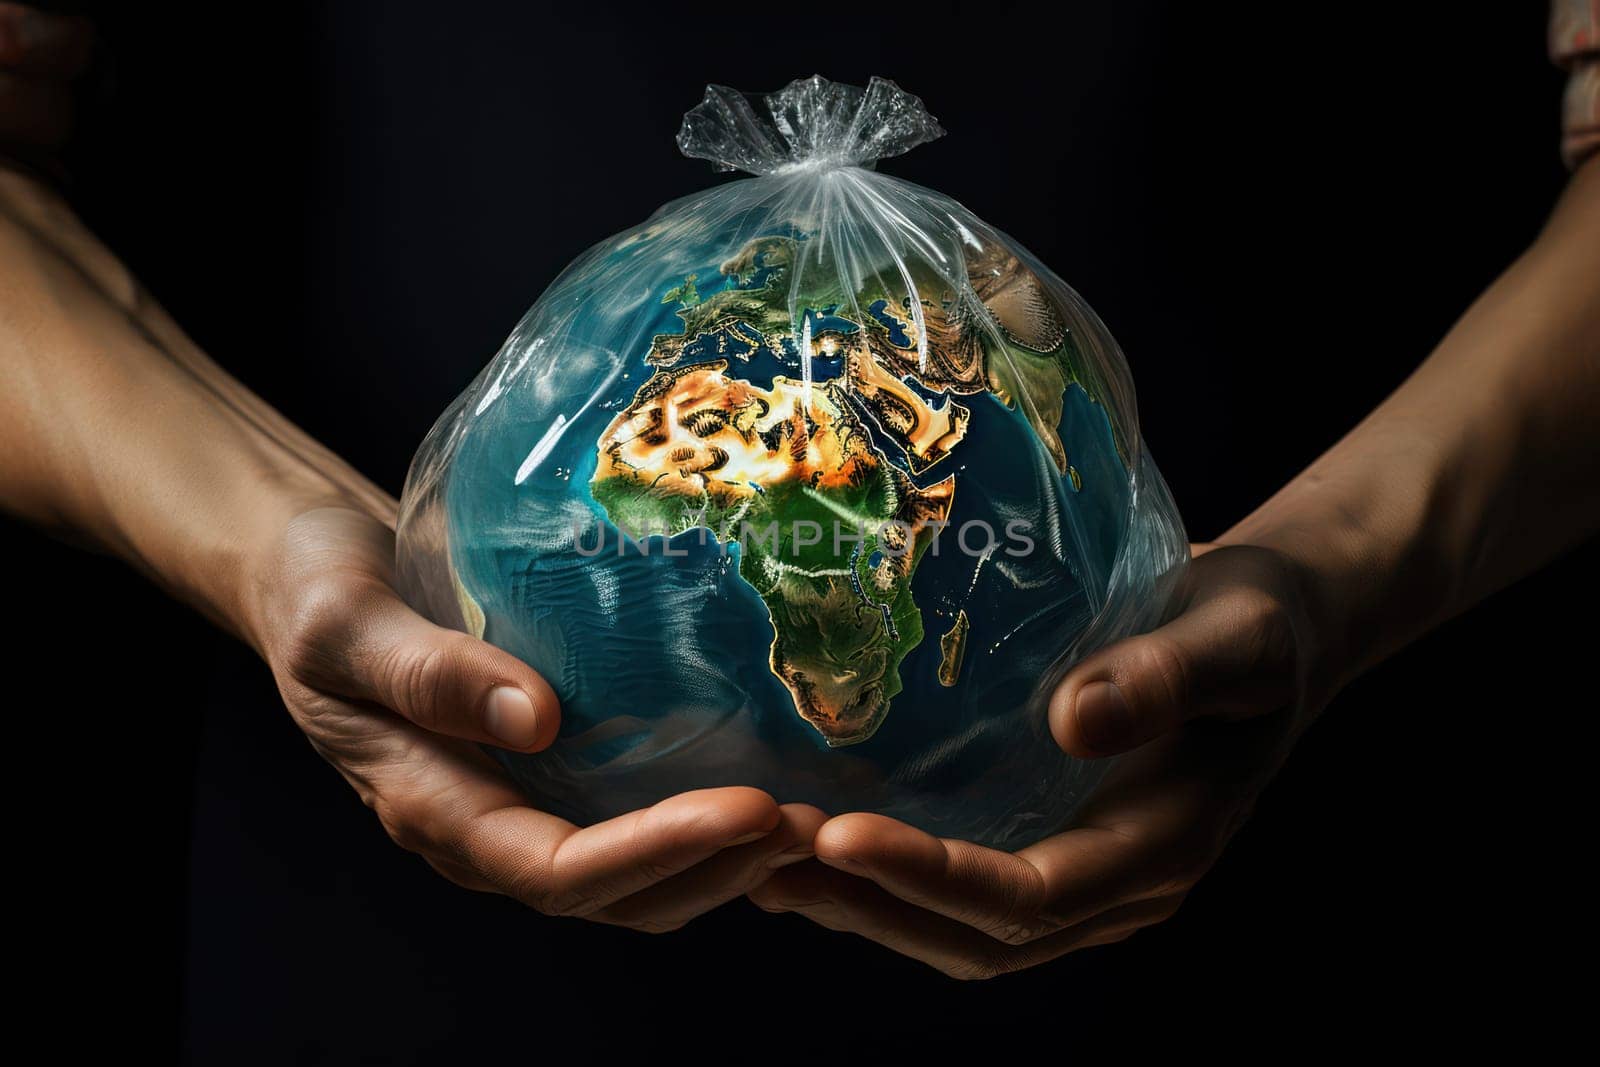 The Earth's Hand: Protecting the Global Environment, a Concept of Care and Hope by Vichizh